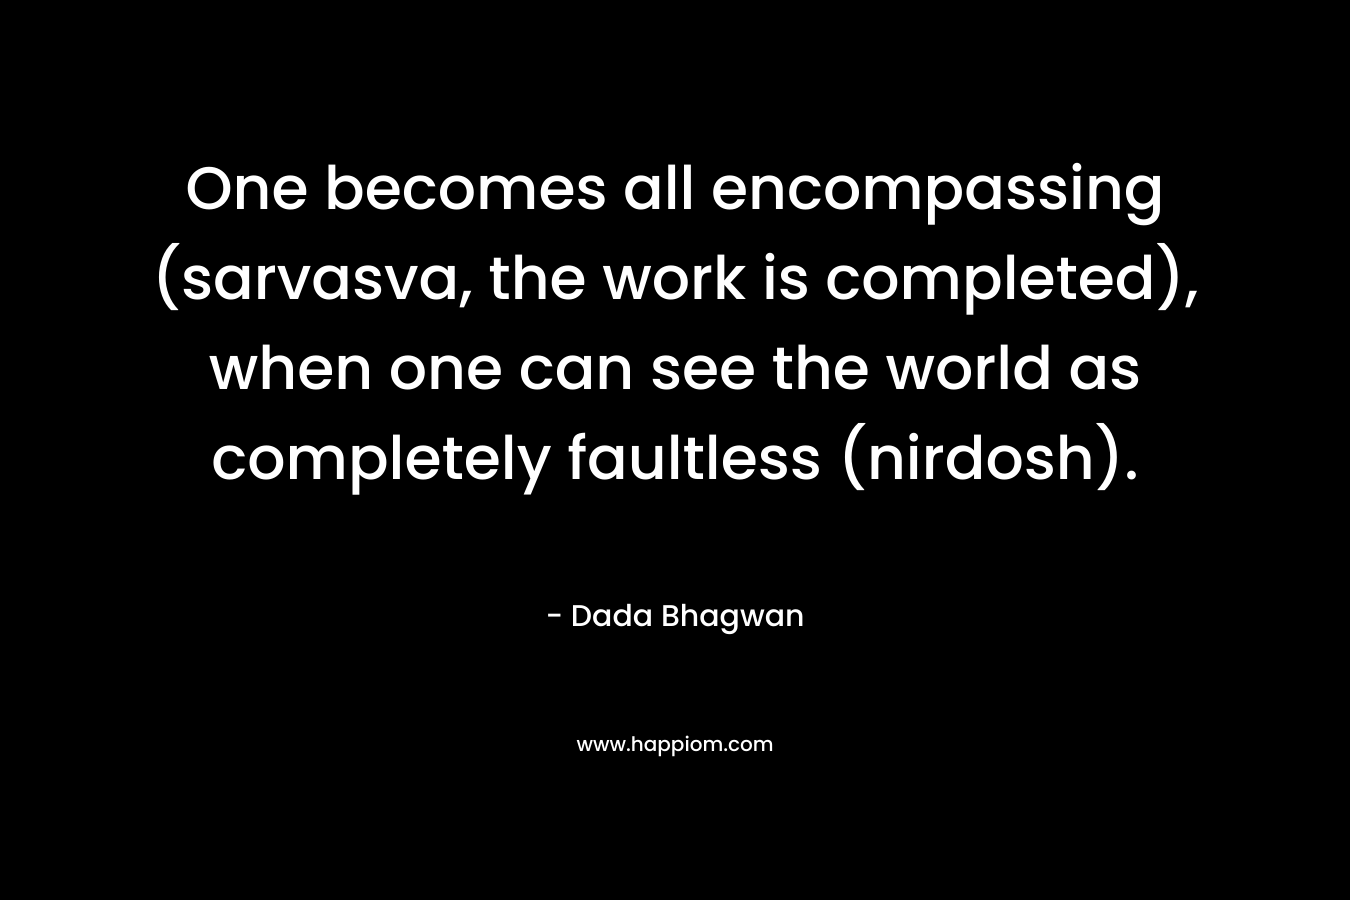 One becomes all encompassing (sarvasva, the work is completed), when one can see the world as completely faultless (nirdosh).